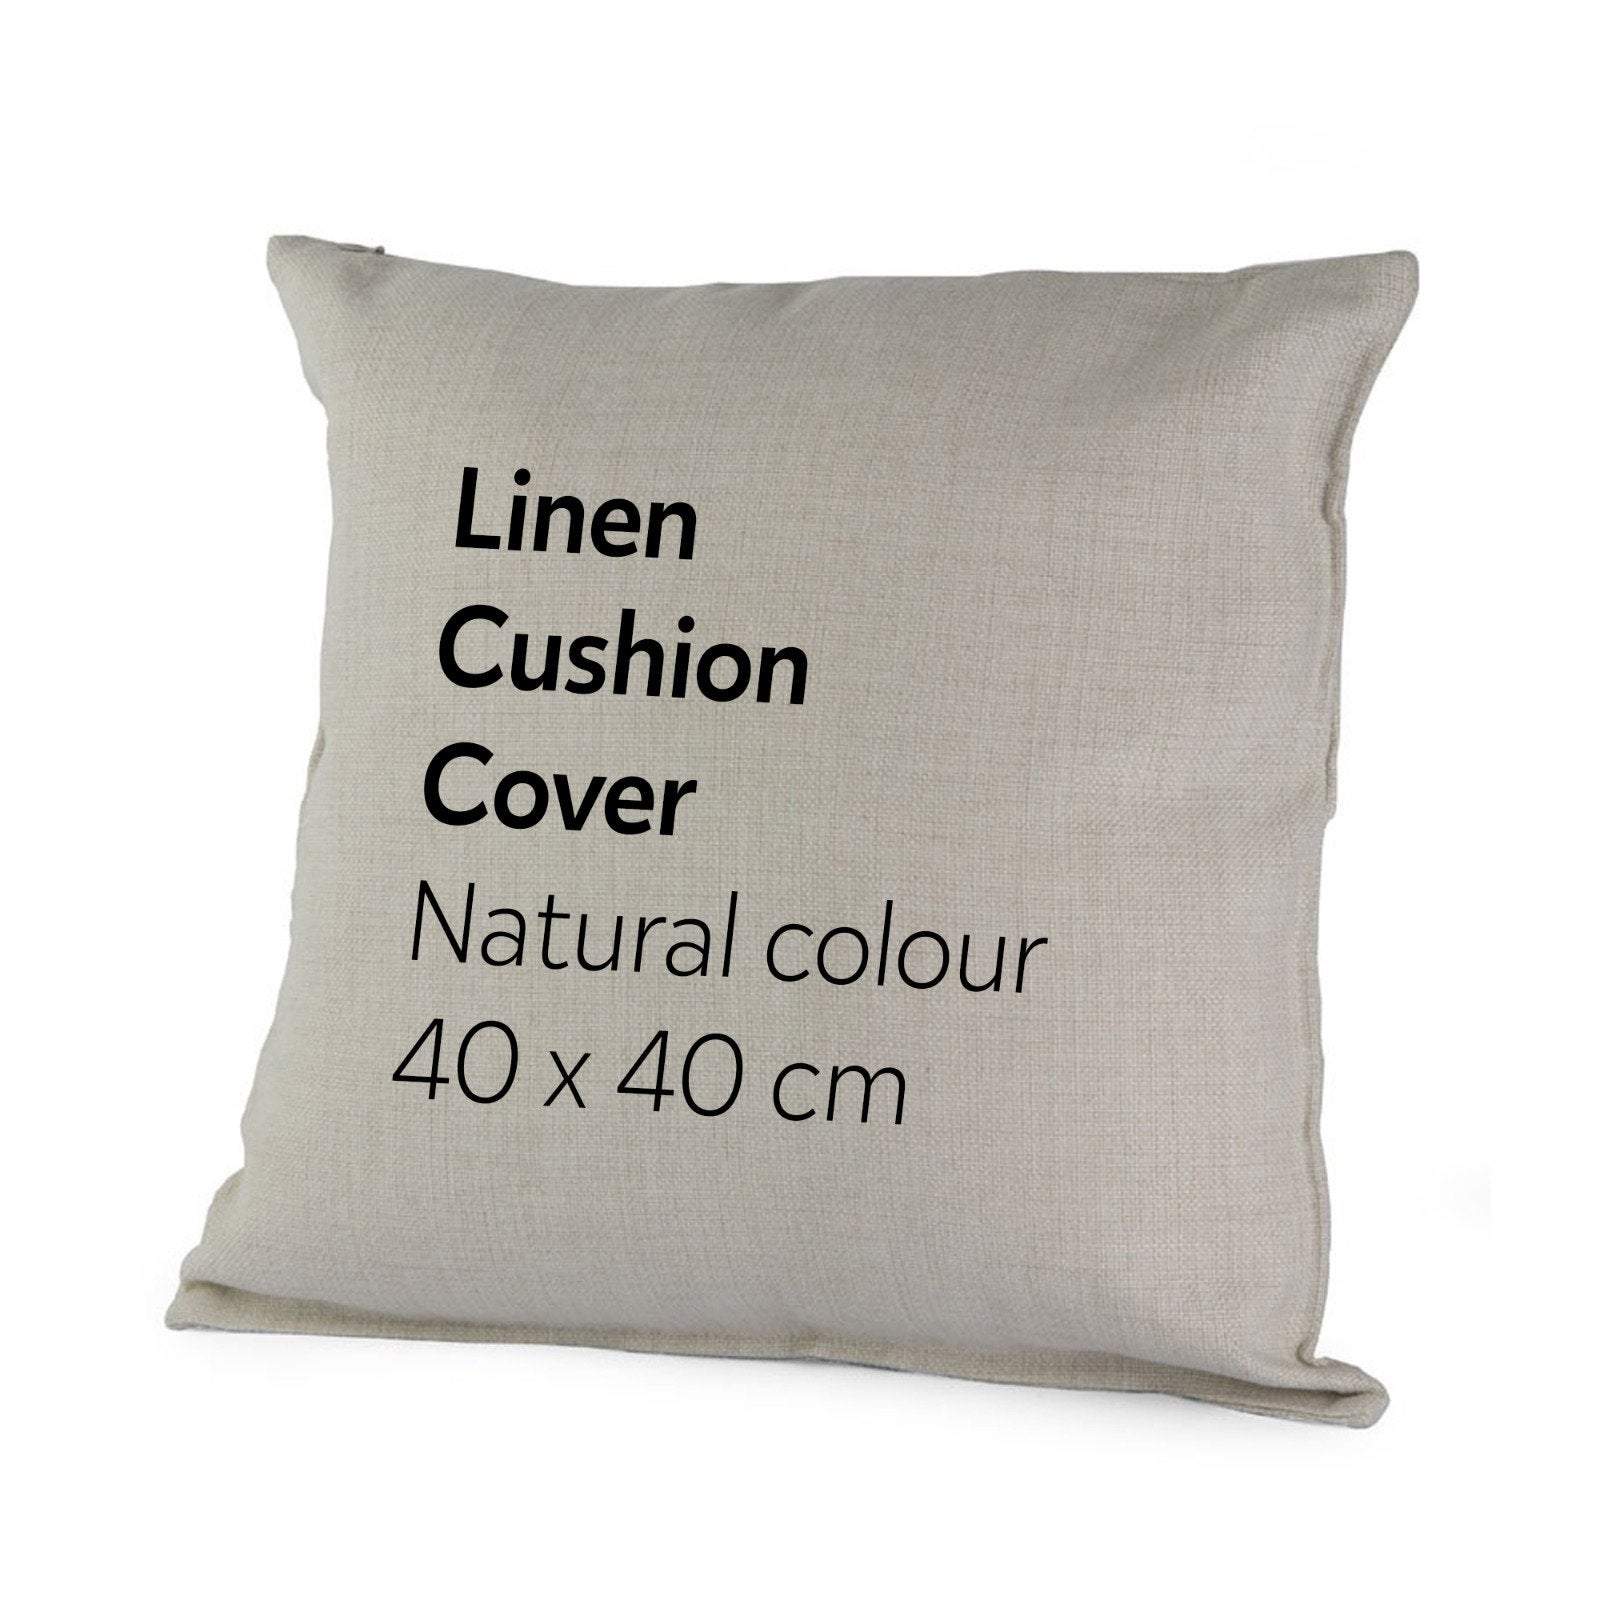 Personalised Sending You A Hug Dad Cushion Cover With Name, Gift For Dad, Social Distance Gift